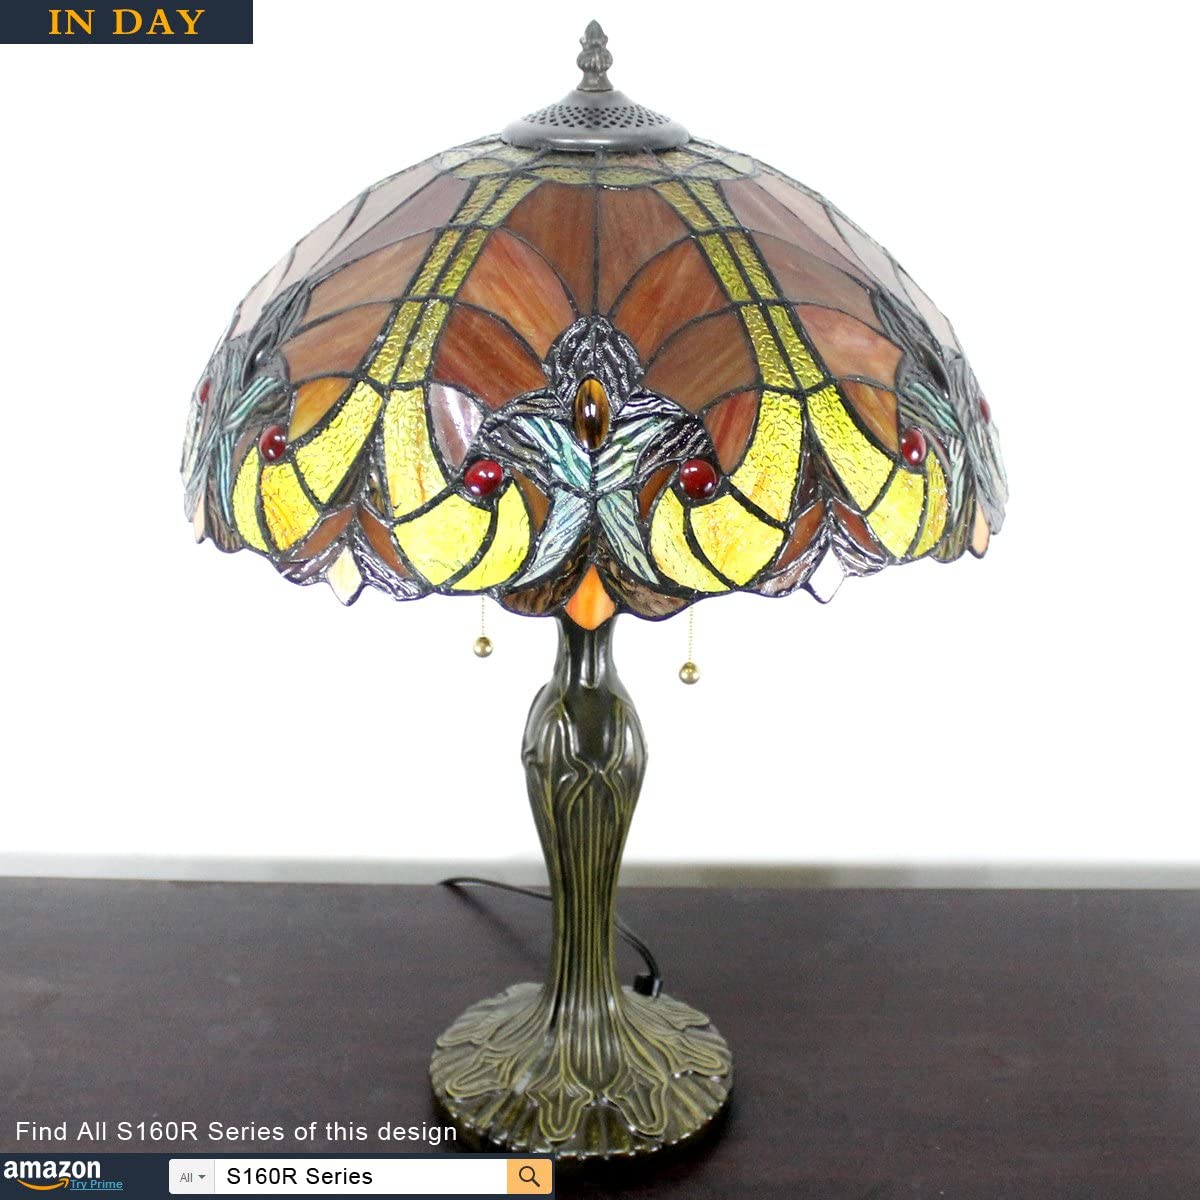 GEDUBIUBOO  Table Lamp Red Liaison Stained Glass Style Bedside Lamp 16X16X24 Inches Antique Desk Reading Light Metal Base Decor Bedroom Living Room  Office S160R Series